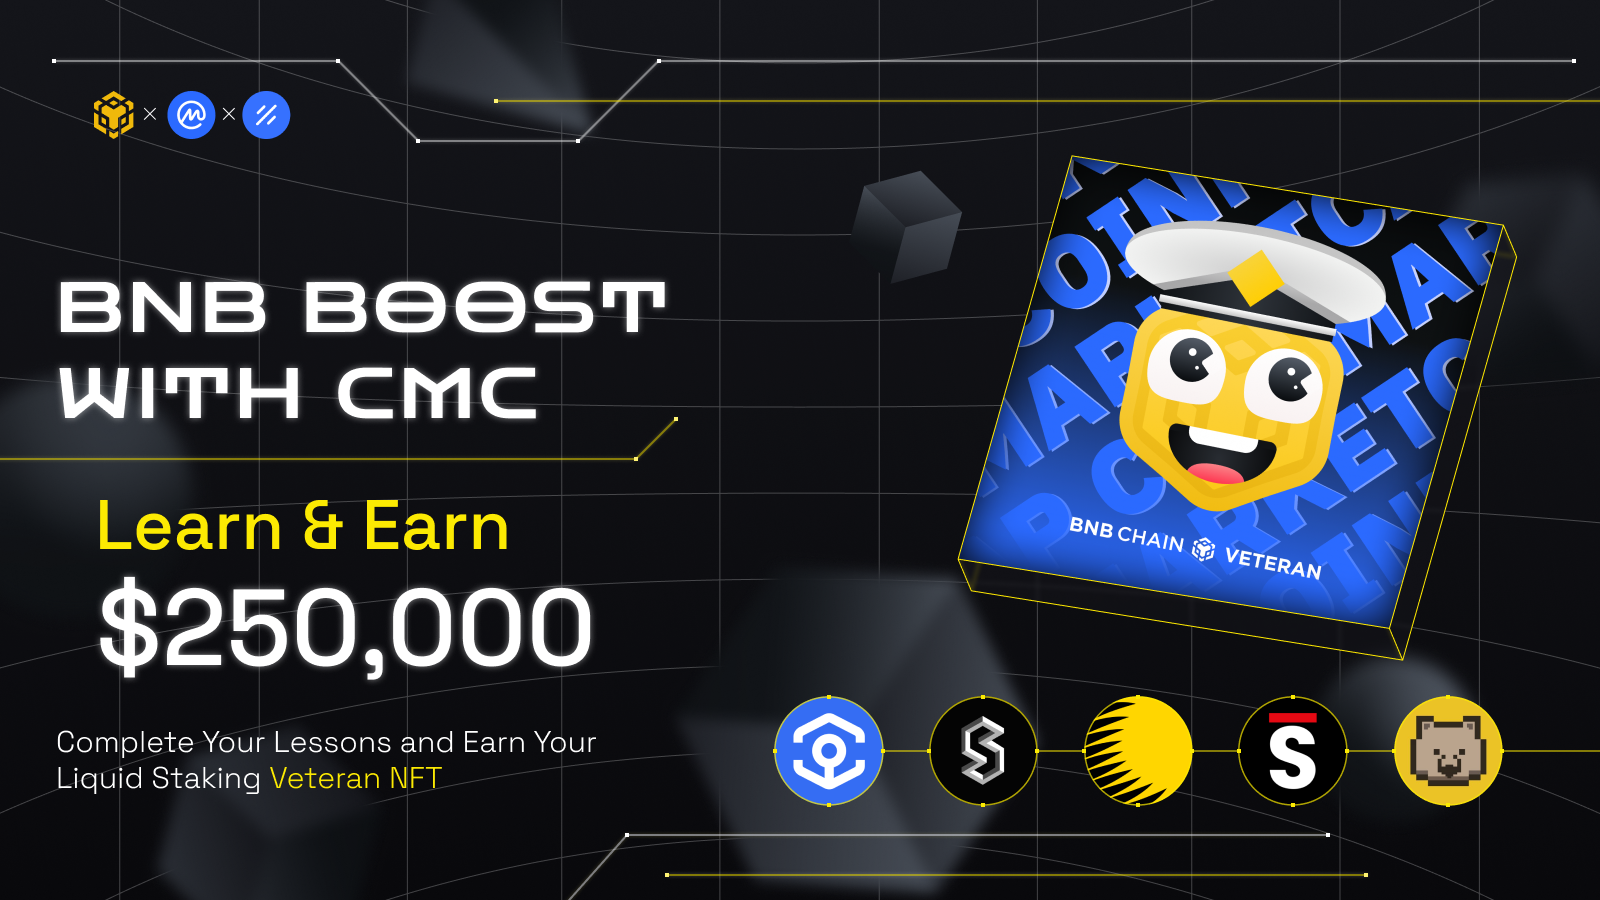 Learn & Earn With 'BNB Boost' Before Campaign Ends